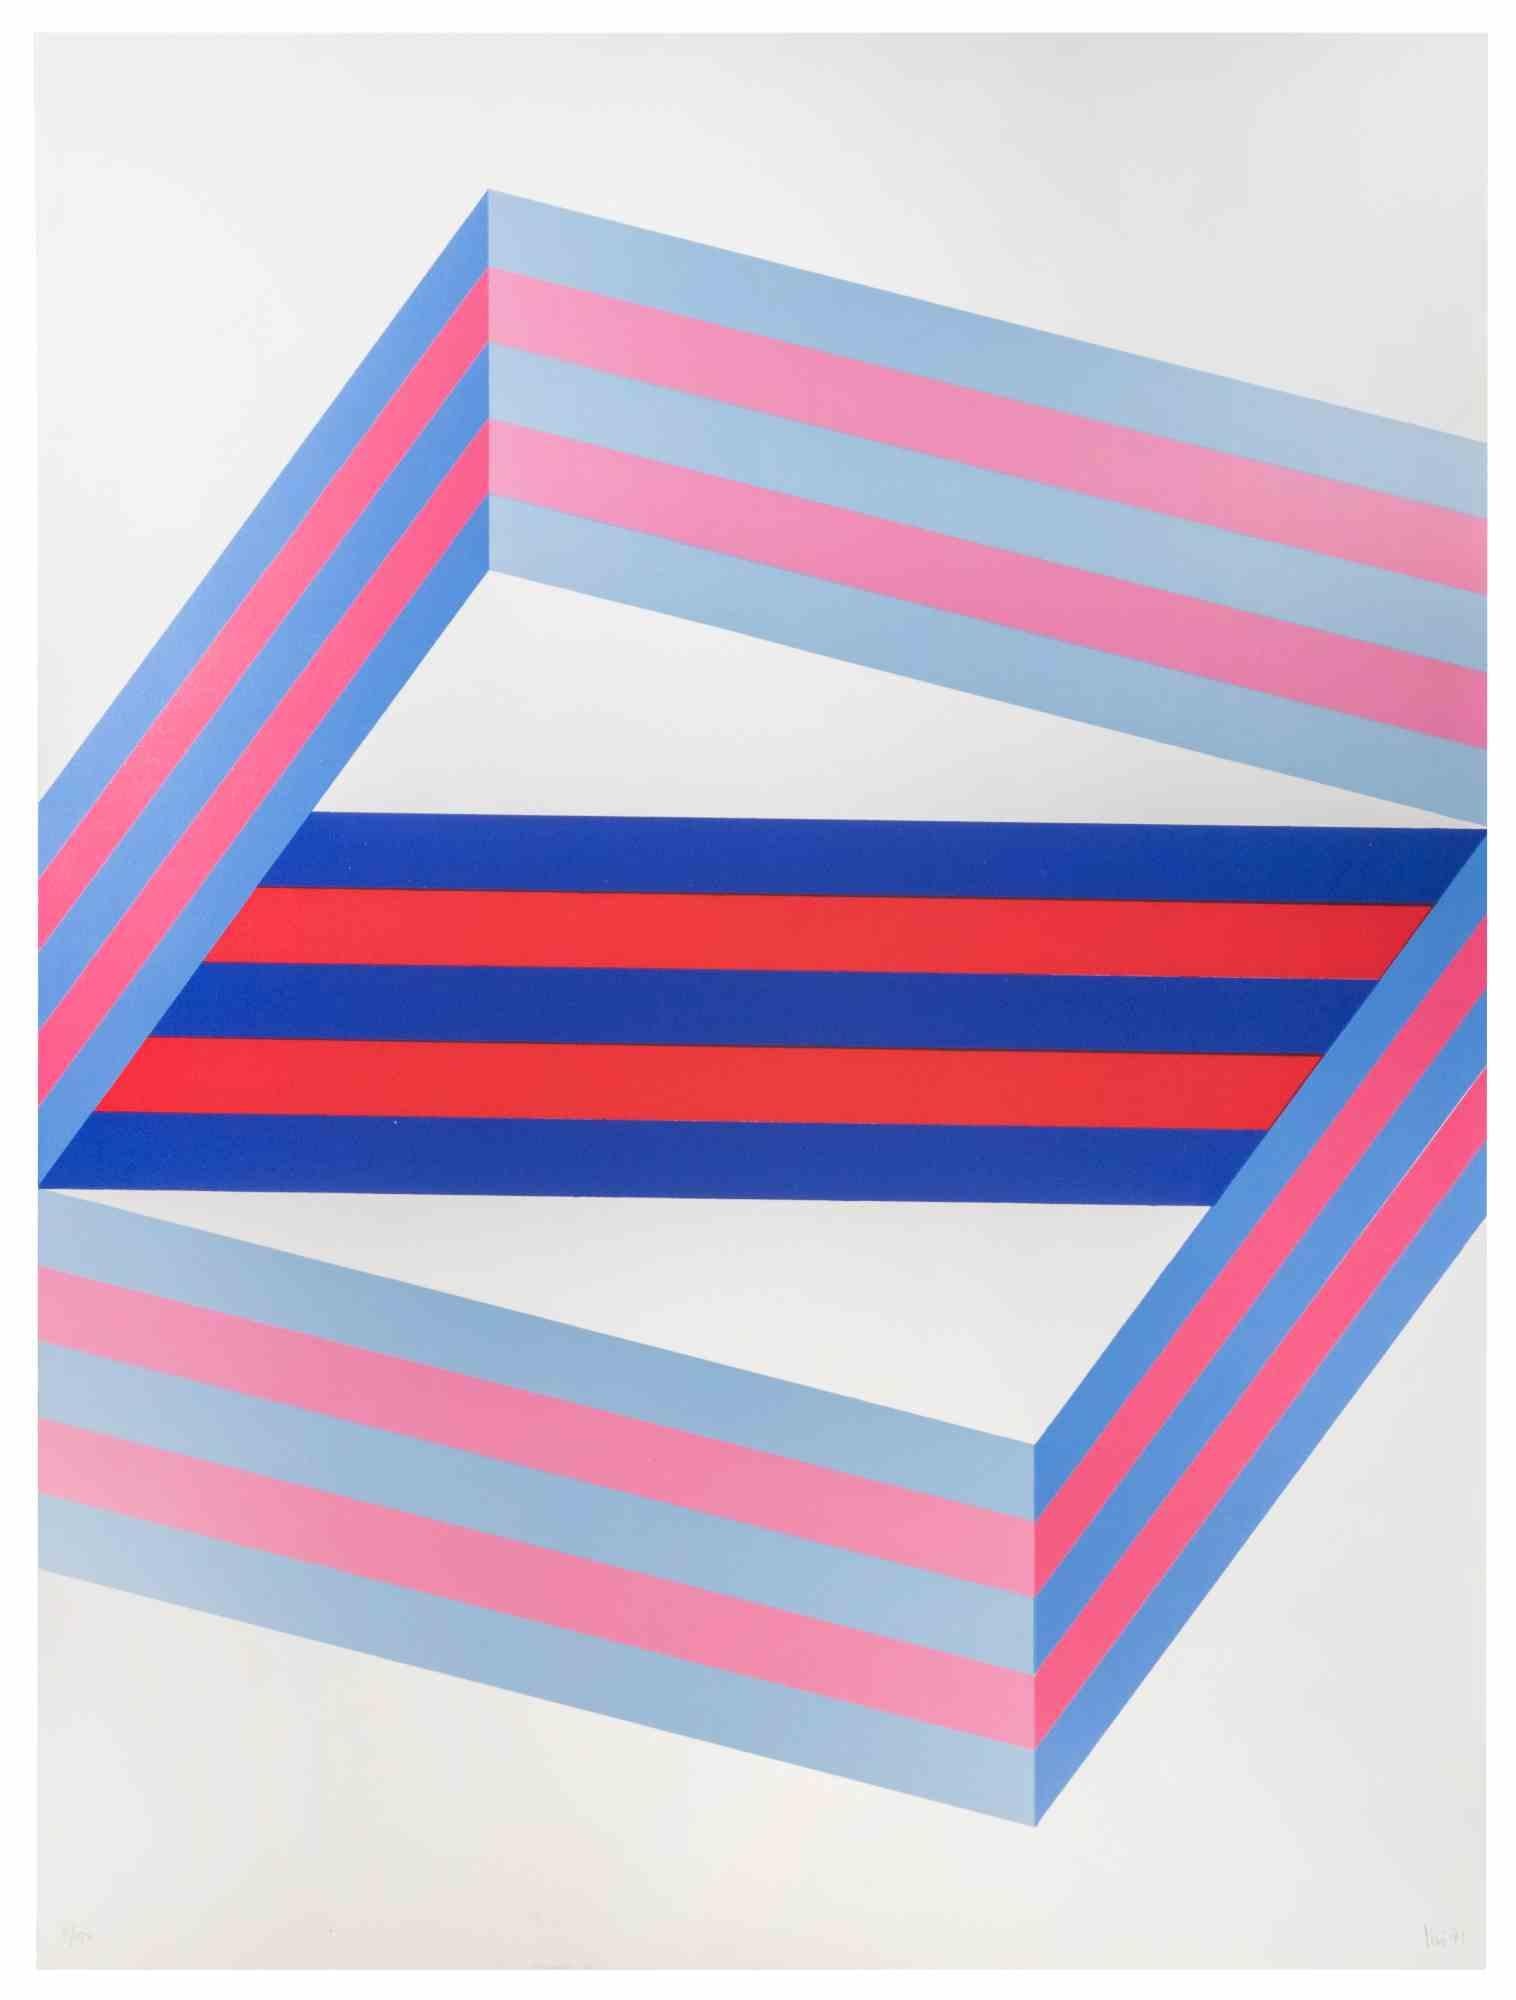 Perspective is a lithograph realized by Renato Livi in 1971.

Hand-signed and dated on the lower right margin.

Numbered on the lower left margin. Edition 6/150.

Abstract composition on the tones of blue and pink, harmoniously realised by mastery